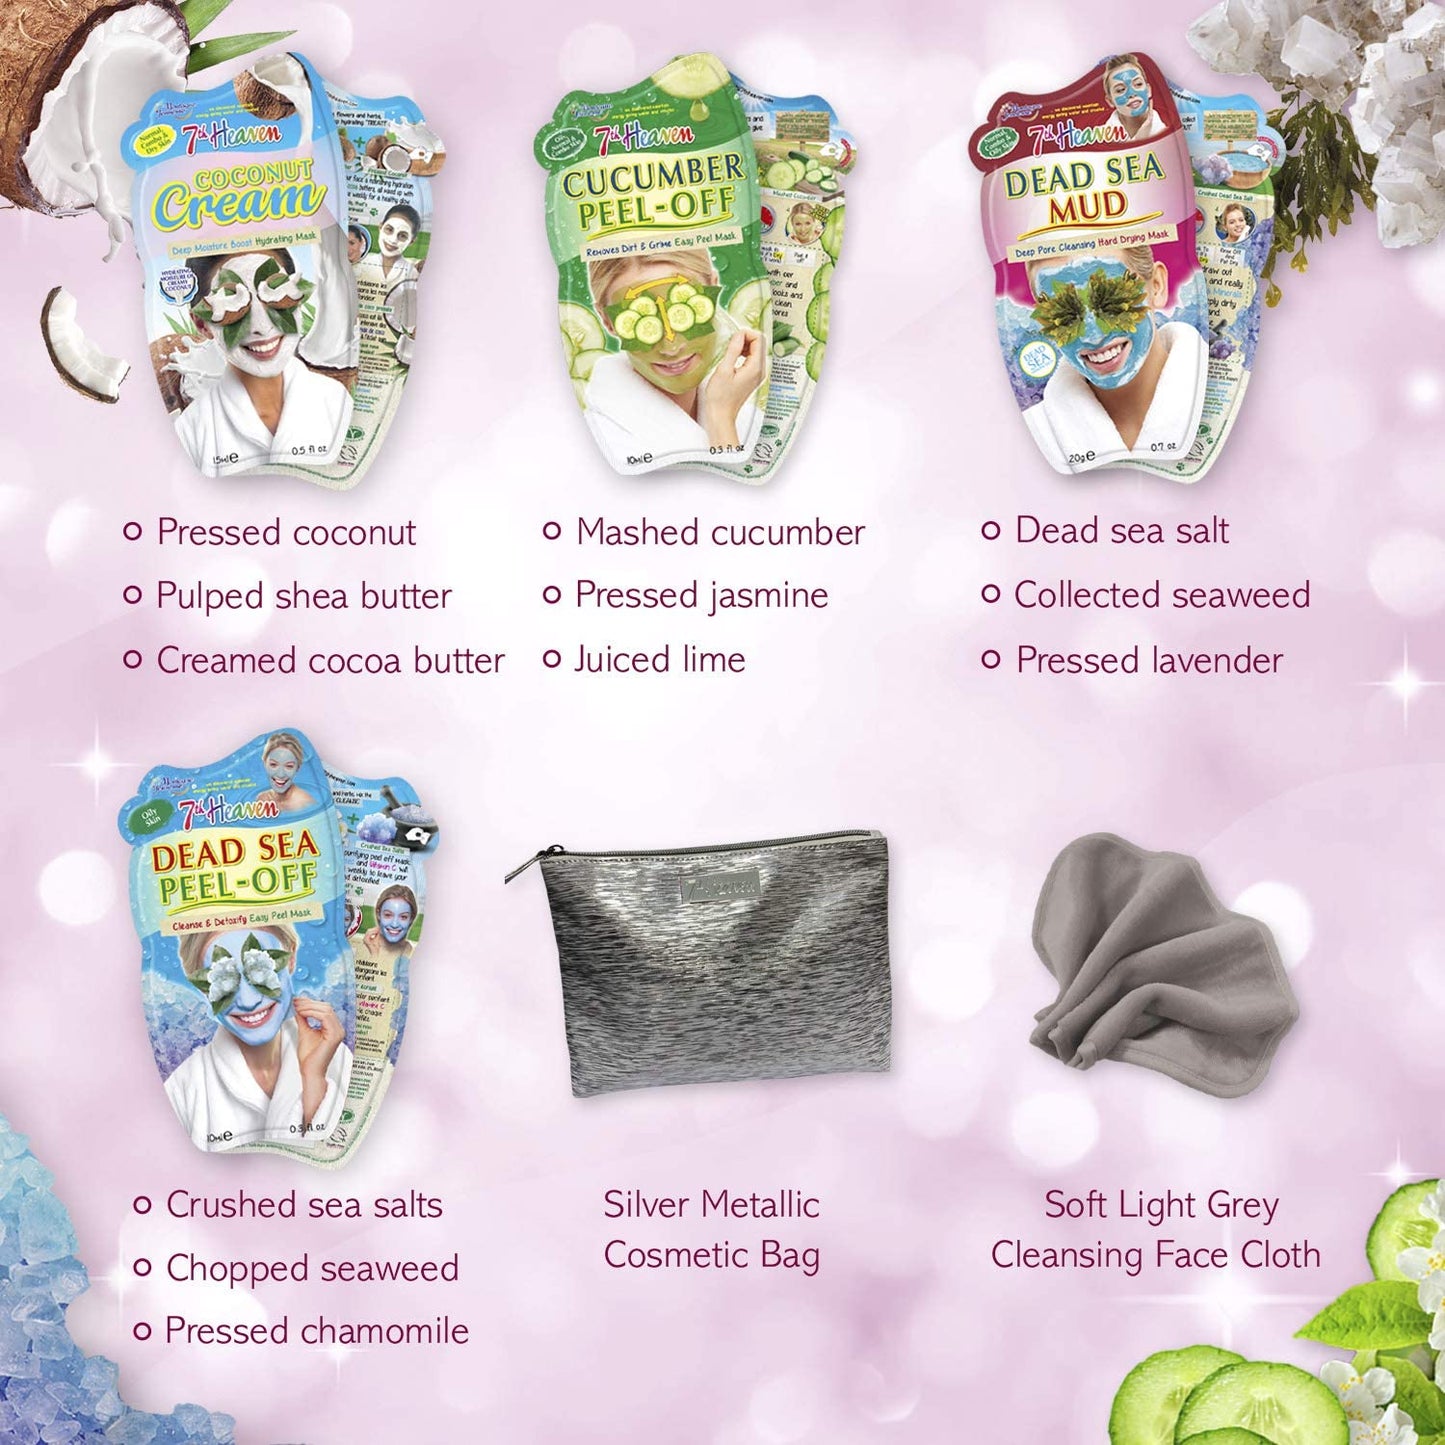 7th Heaven Pamper & Party Bundle with 10 Facial Skincare Masks - Includes a Silver Cosmetics Bag and a Cleansing Face Cloth